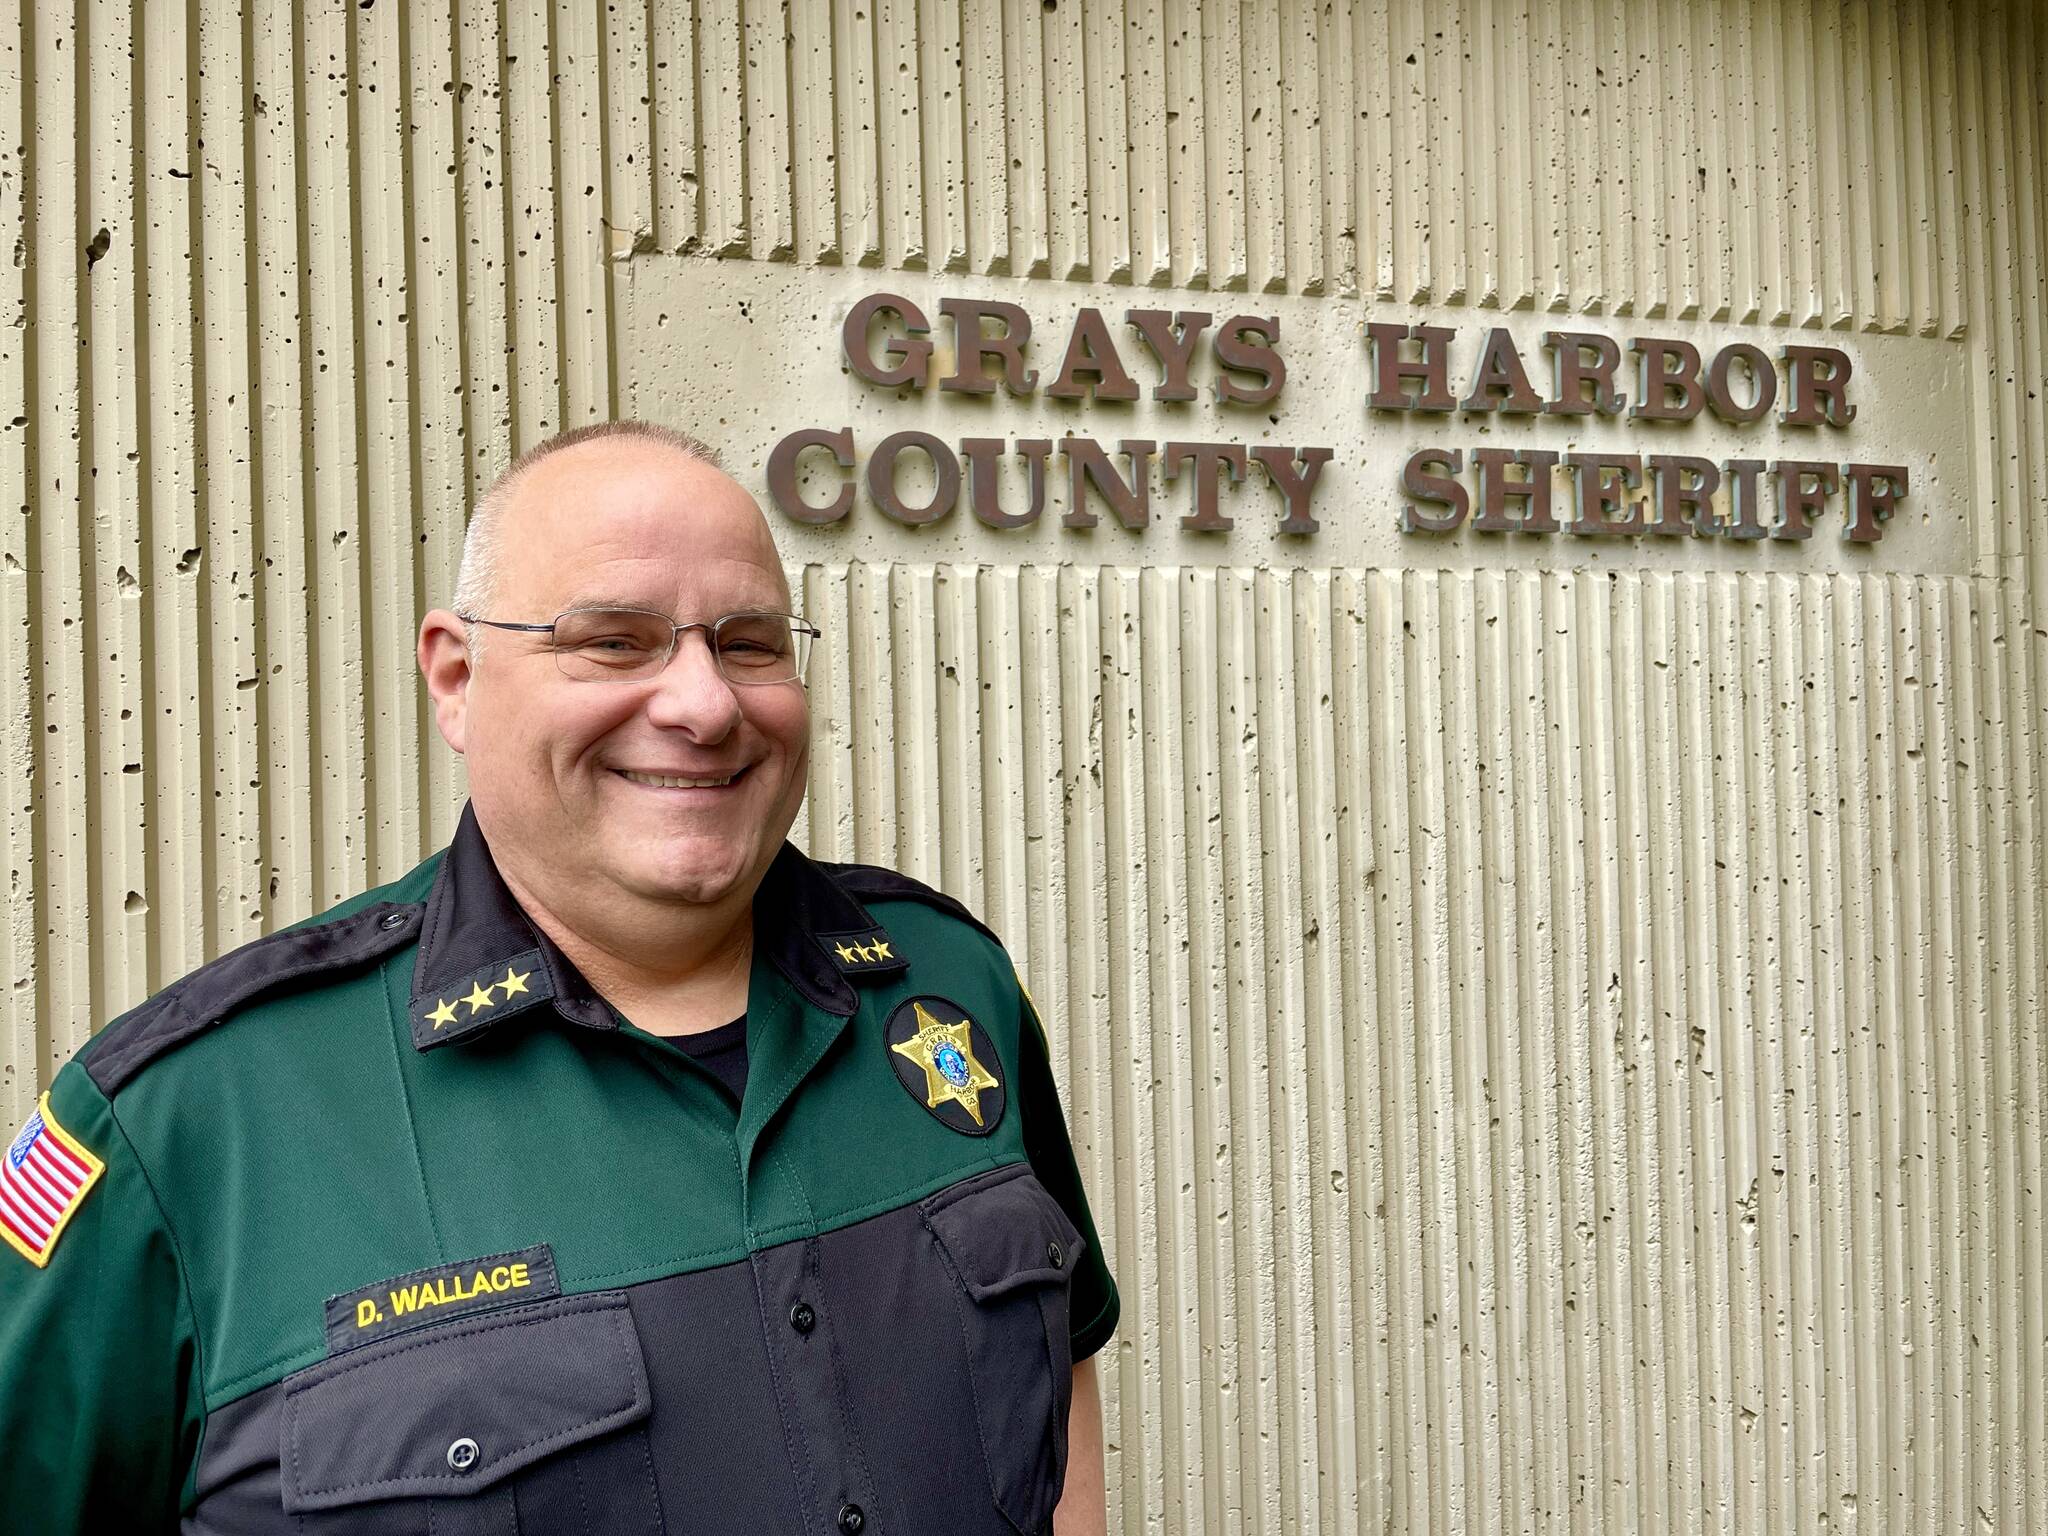 Sheriff Darrin Wallace poses in front of the sheriff’s office on Jan. 5. Wallace was sworn in as the sheriff of Grays Harbor County last week. (Michael S. Lockett / The Daily World)